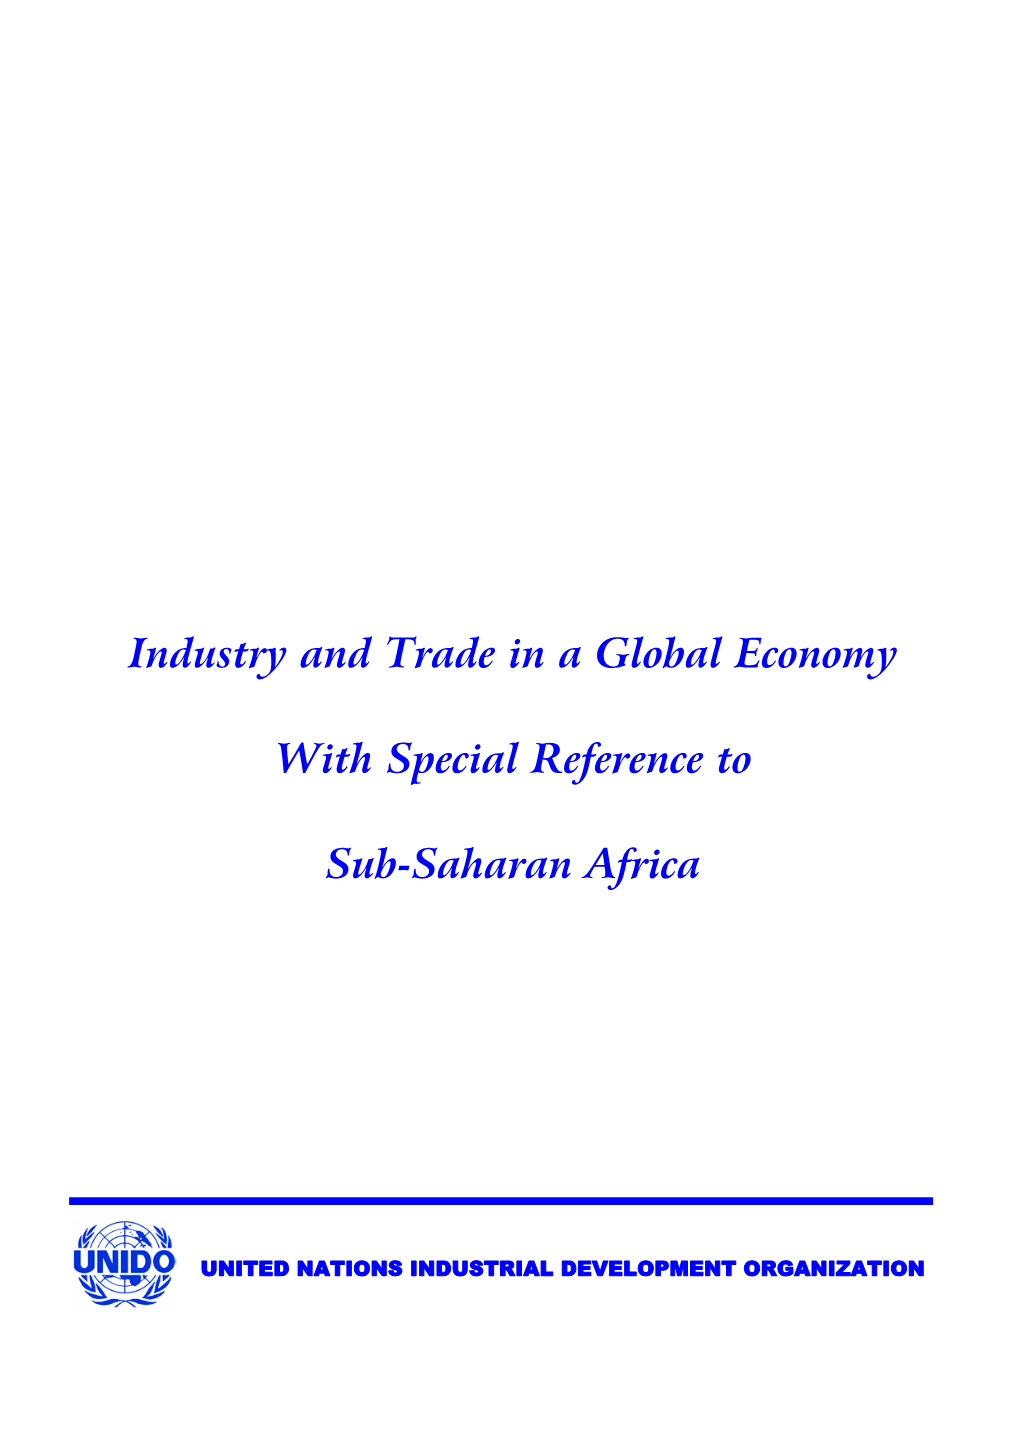 Industry and Trade in a Global Economy with Special Reference To